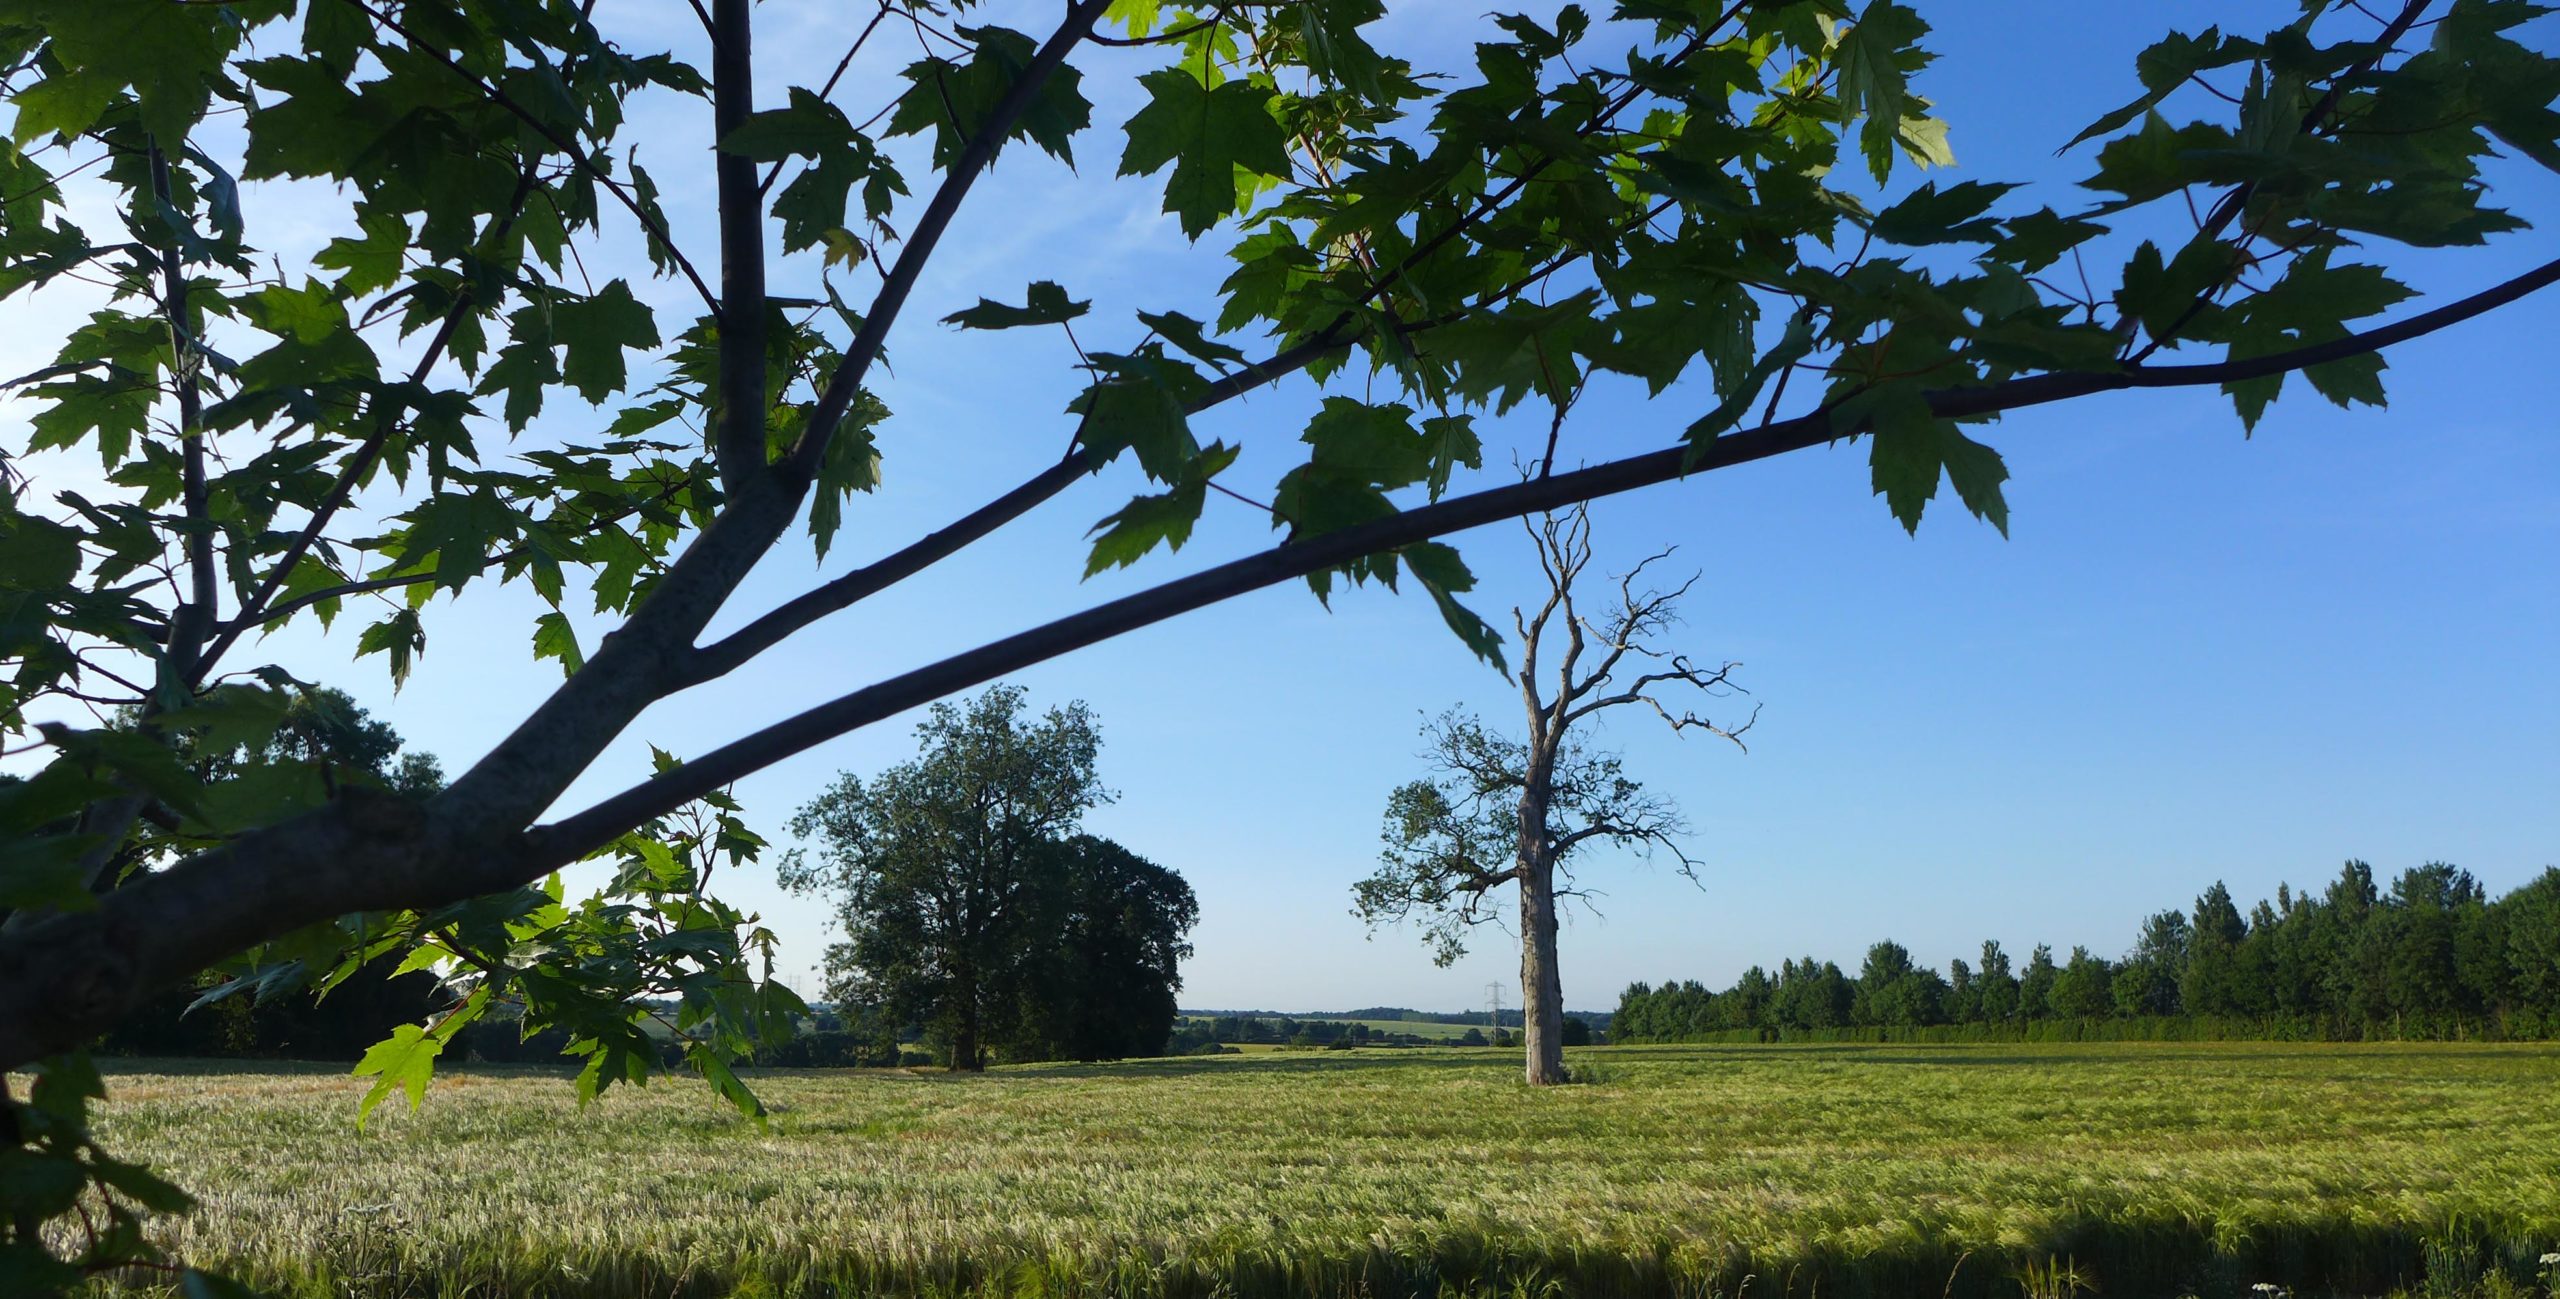 beautiful green field with trees and a blue sky